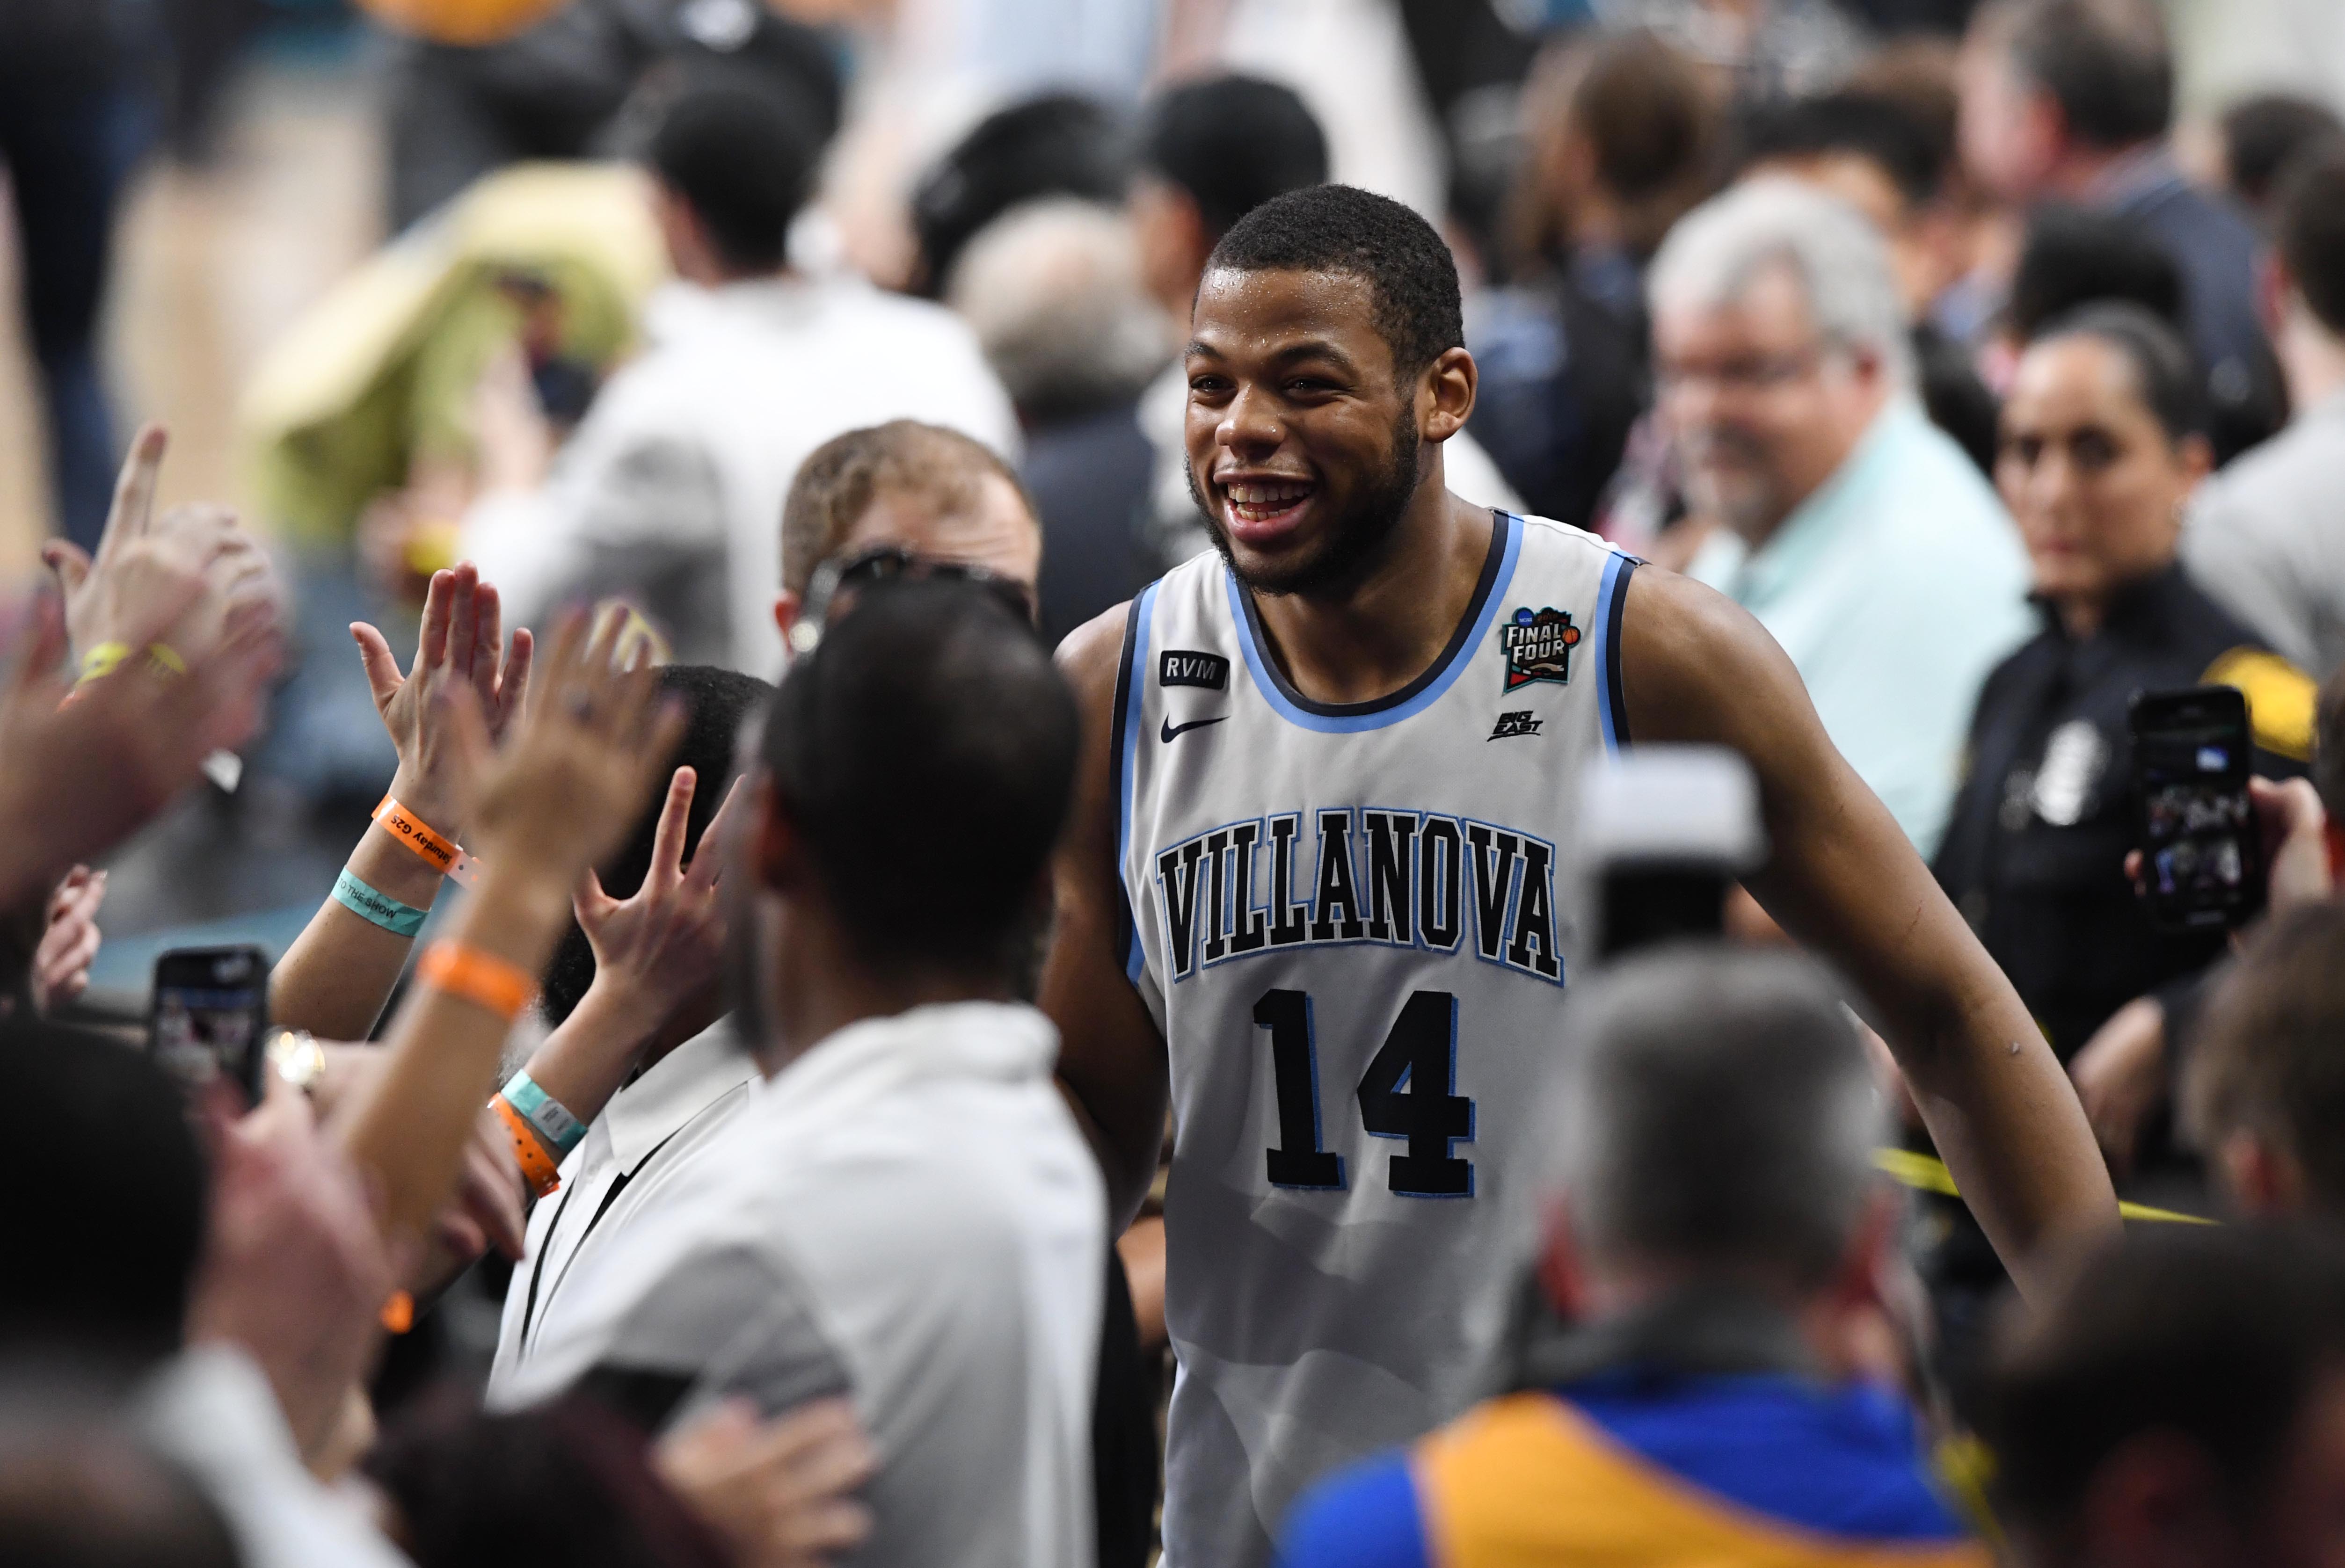 Opinion: I Find it Hard to Root Against Villanova